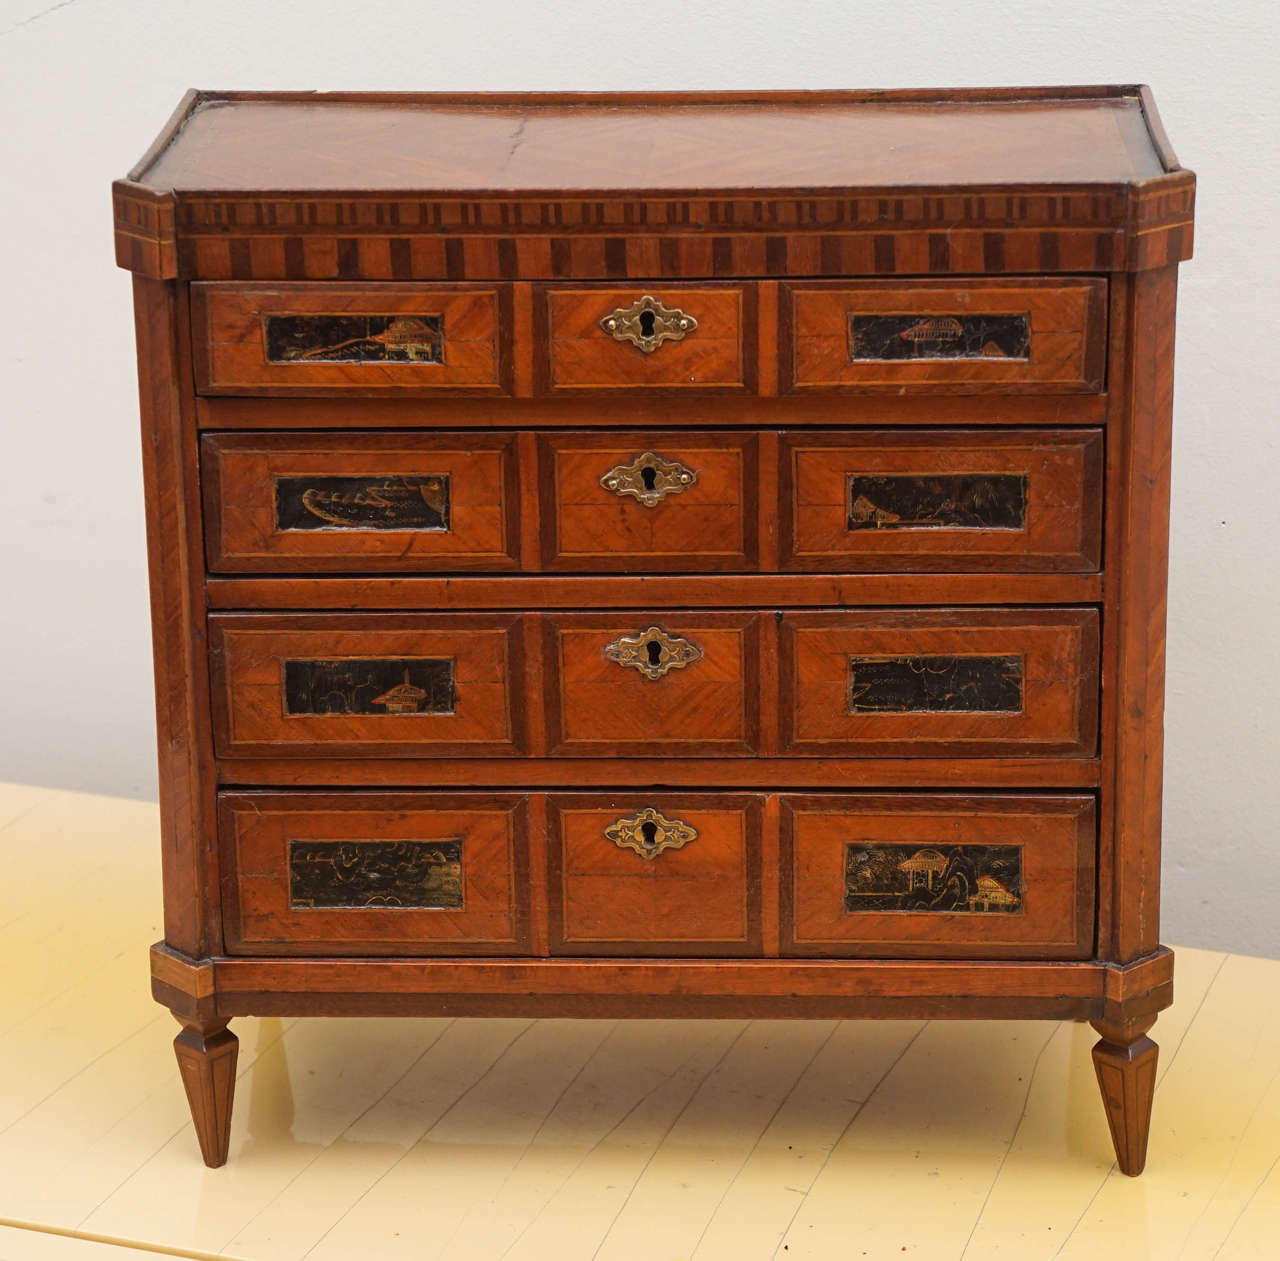 This superb miniature chest has intricate marquetry and 